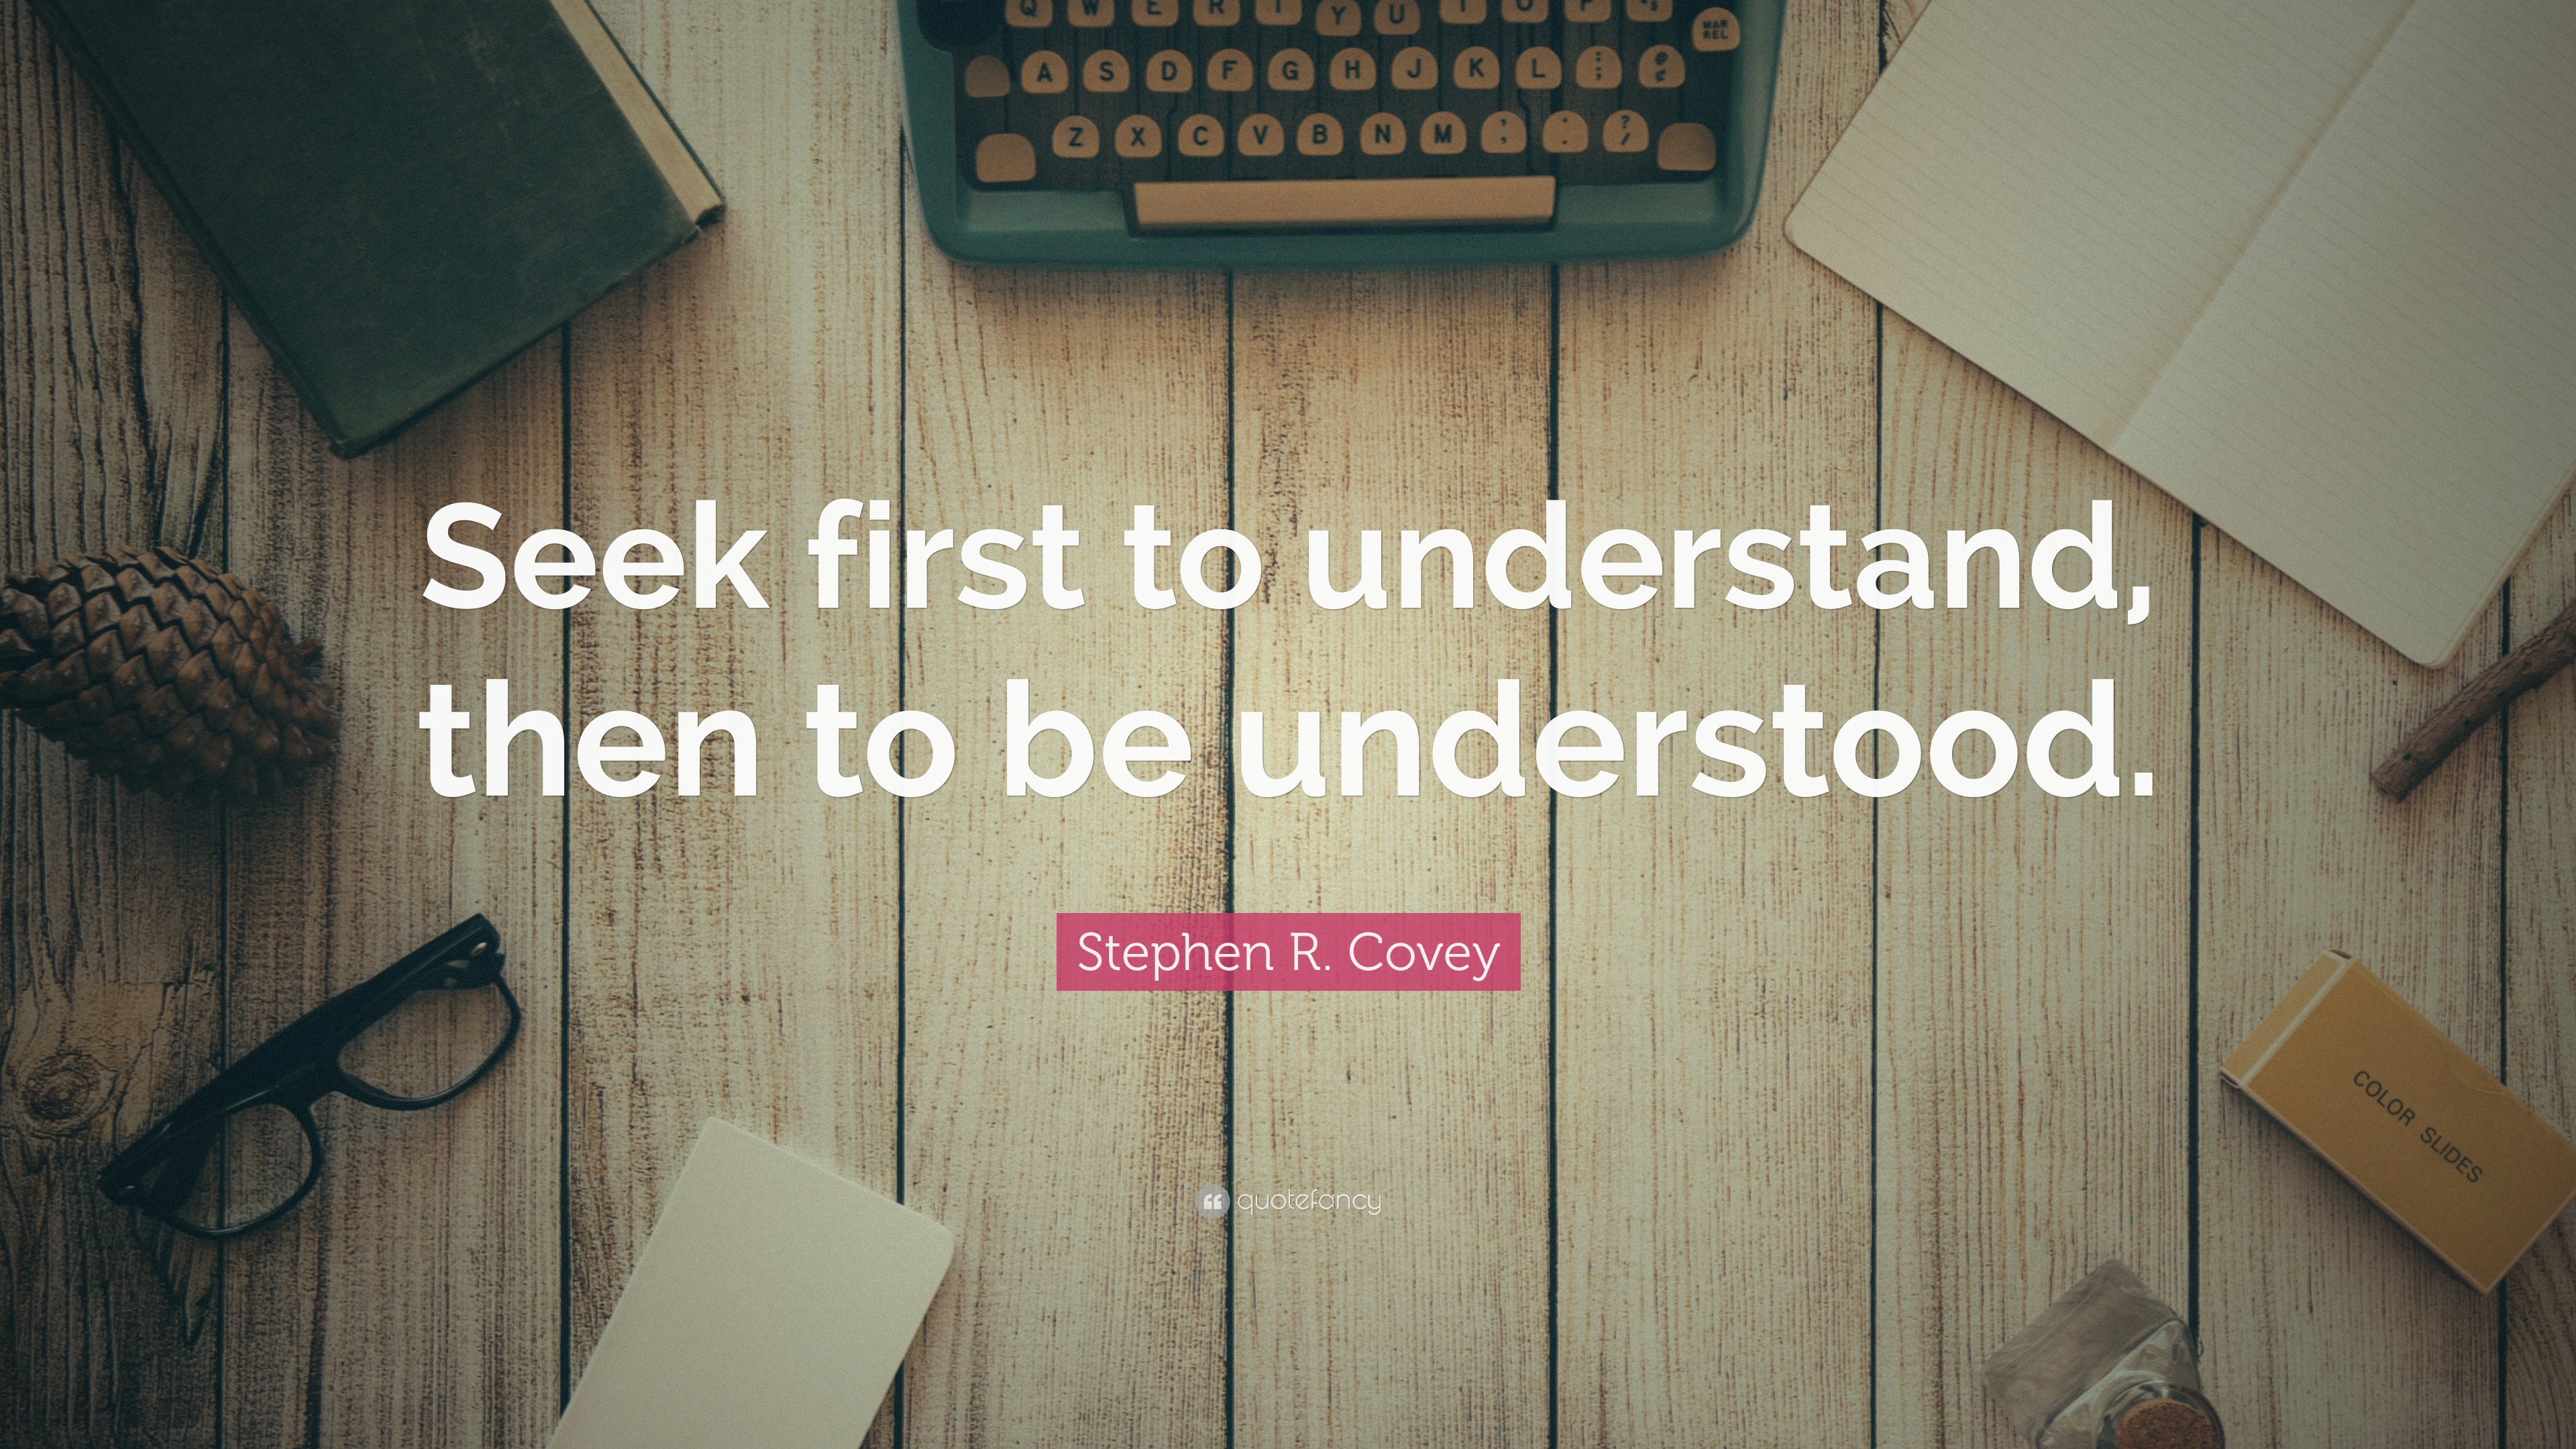 stephen covey seek first to understand